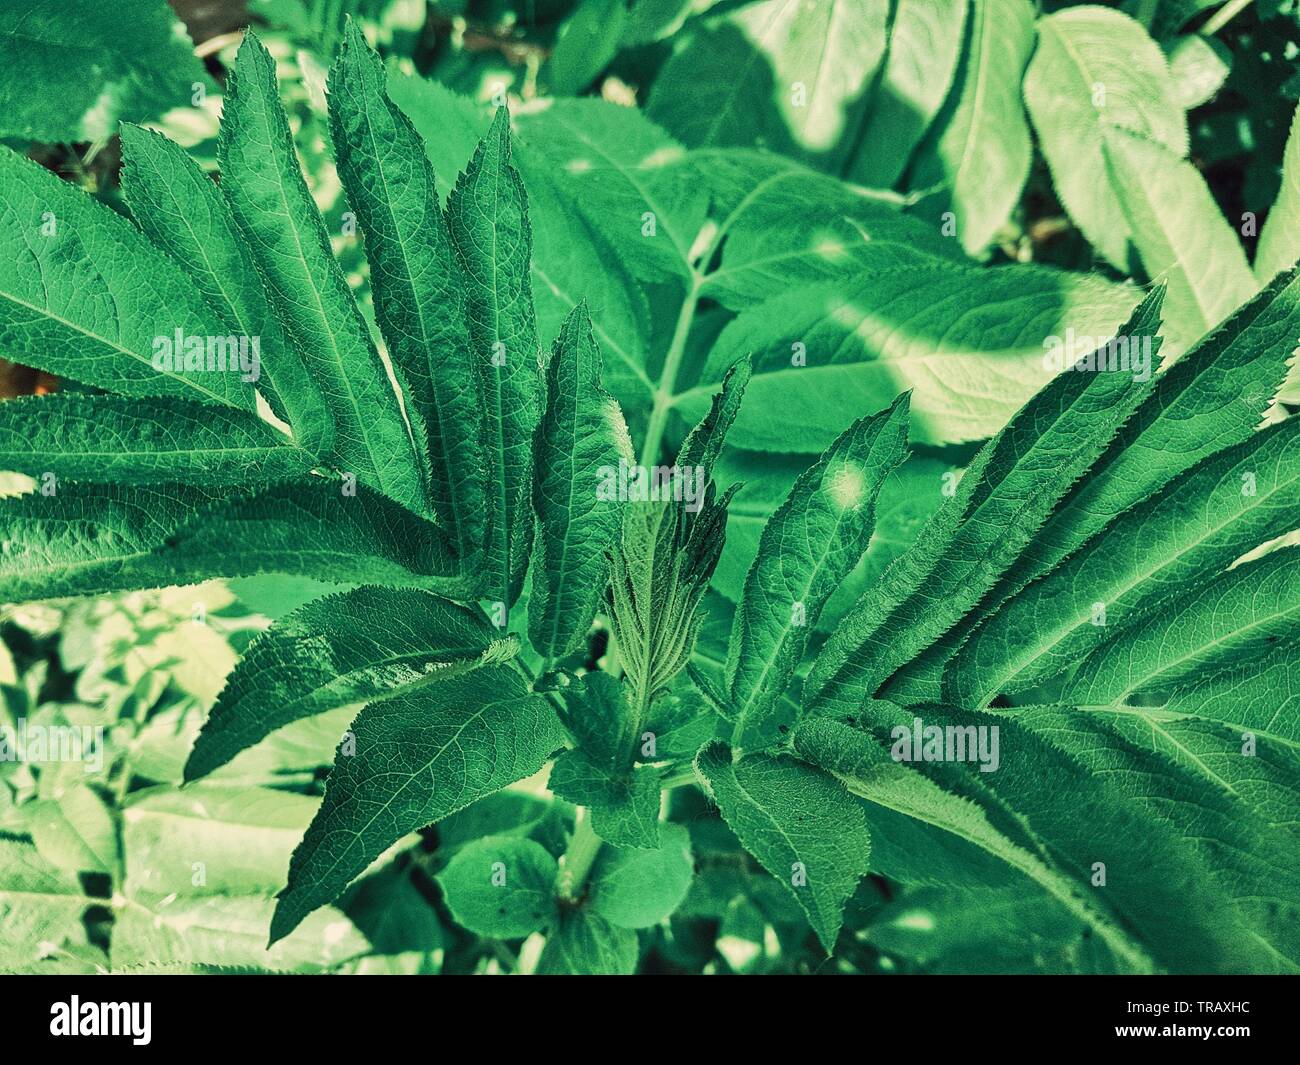 Green leaves of a plant after a spring rain Stock Photo